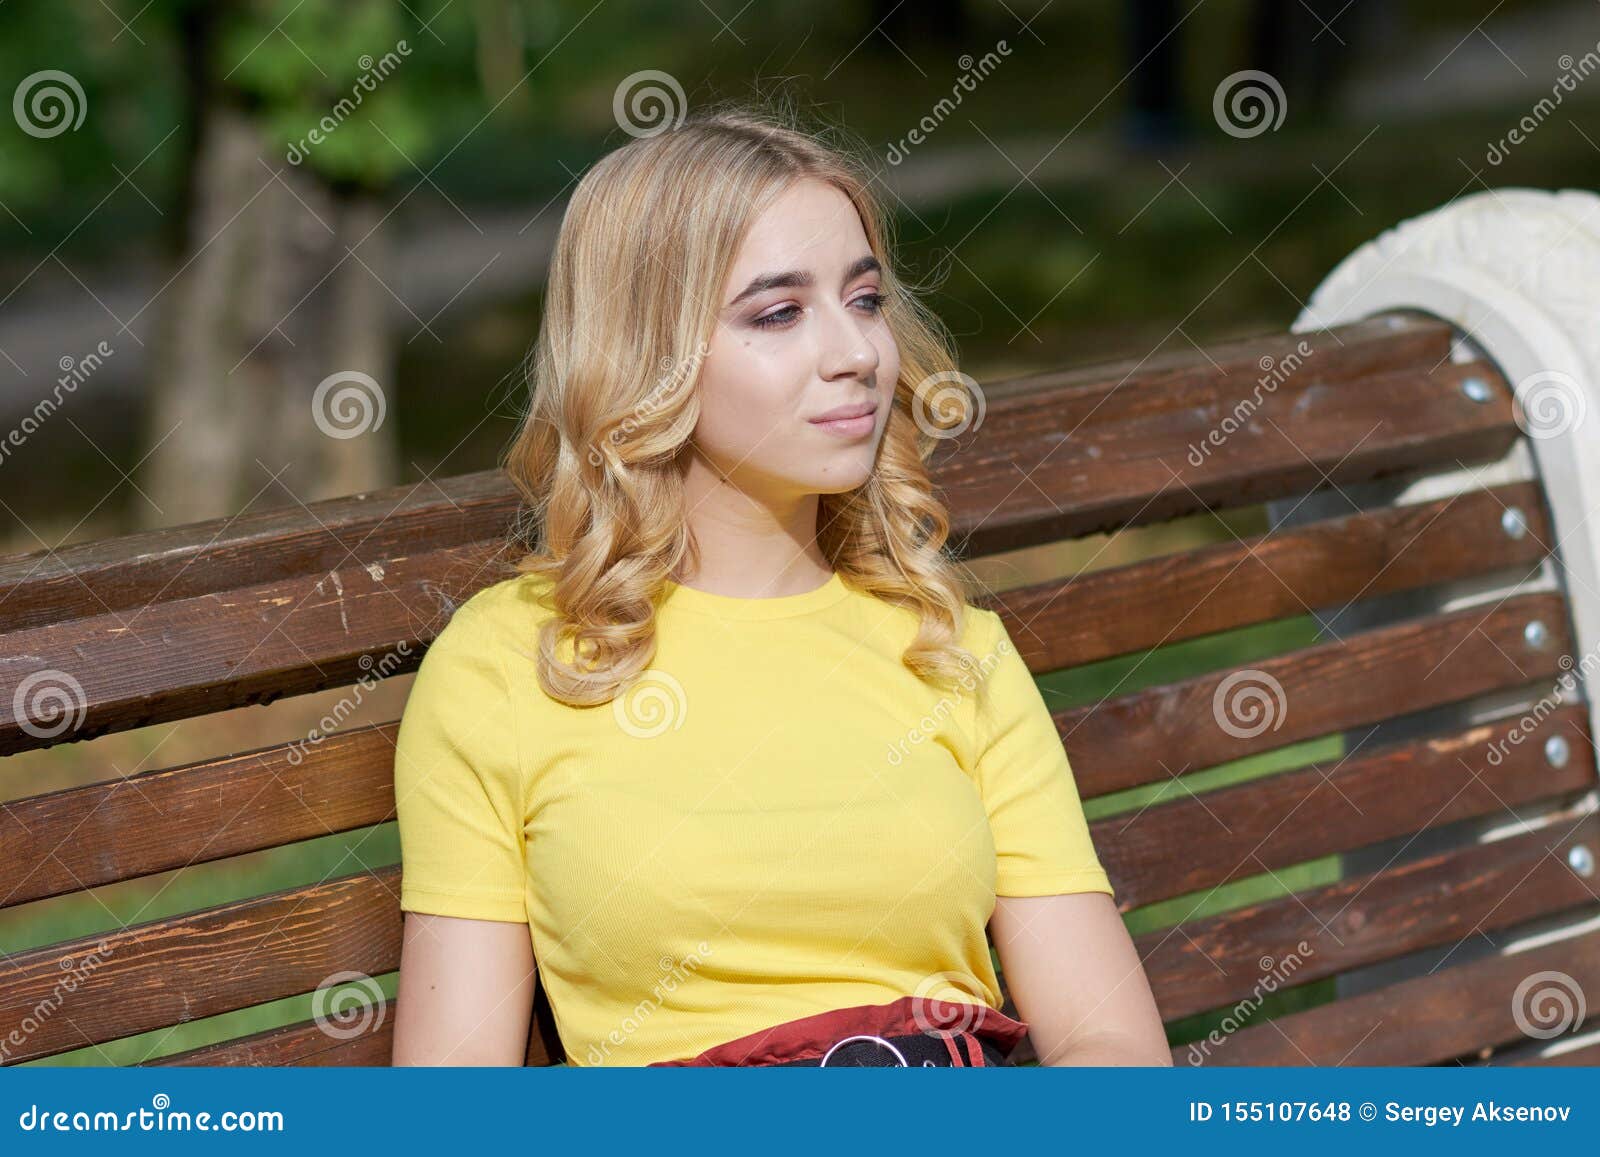 Young Pretty Blonde Posing in a Park Stock Photo - Image of young ...